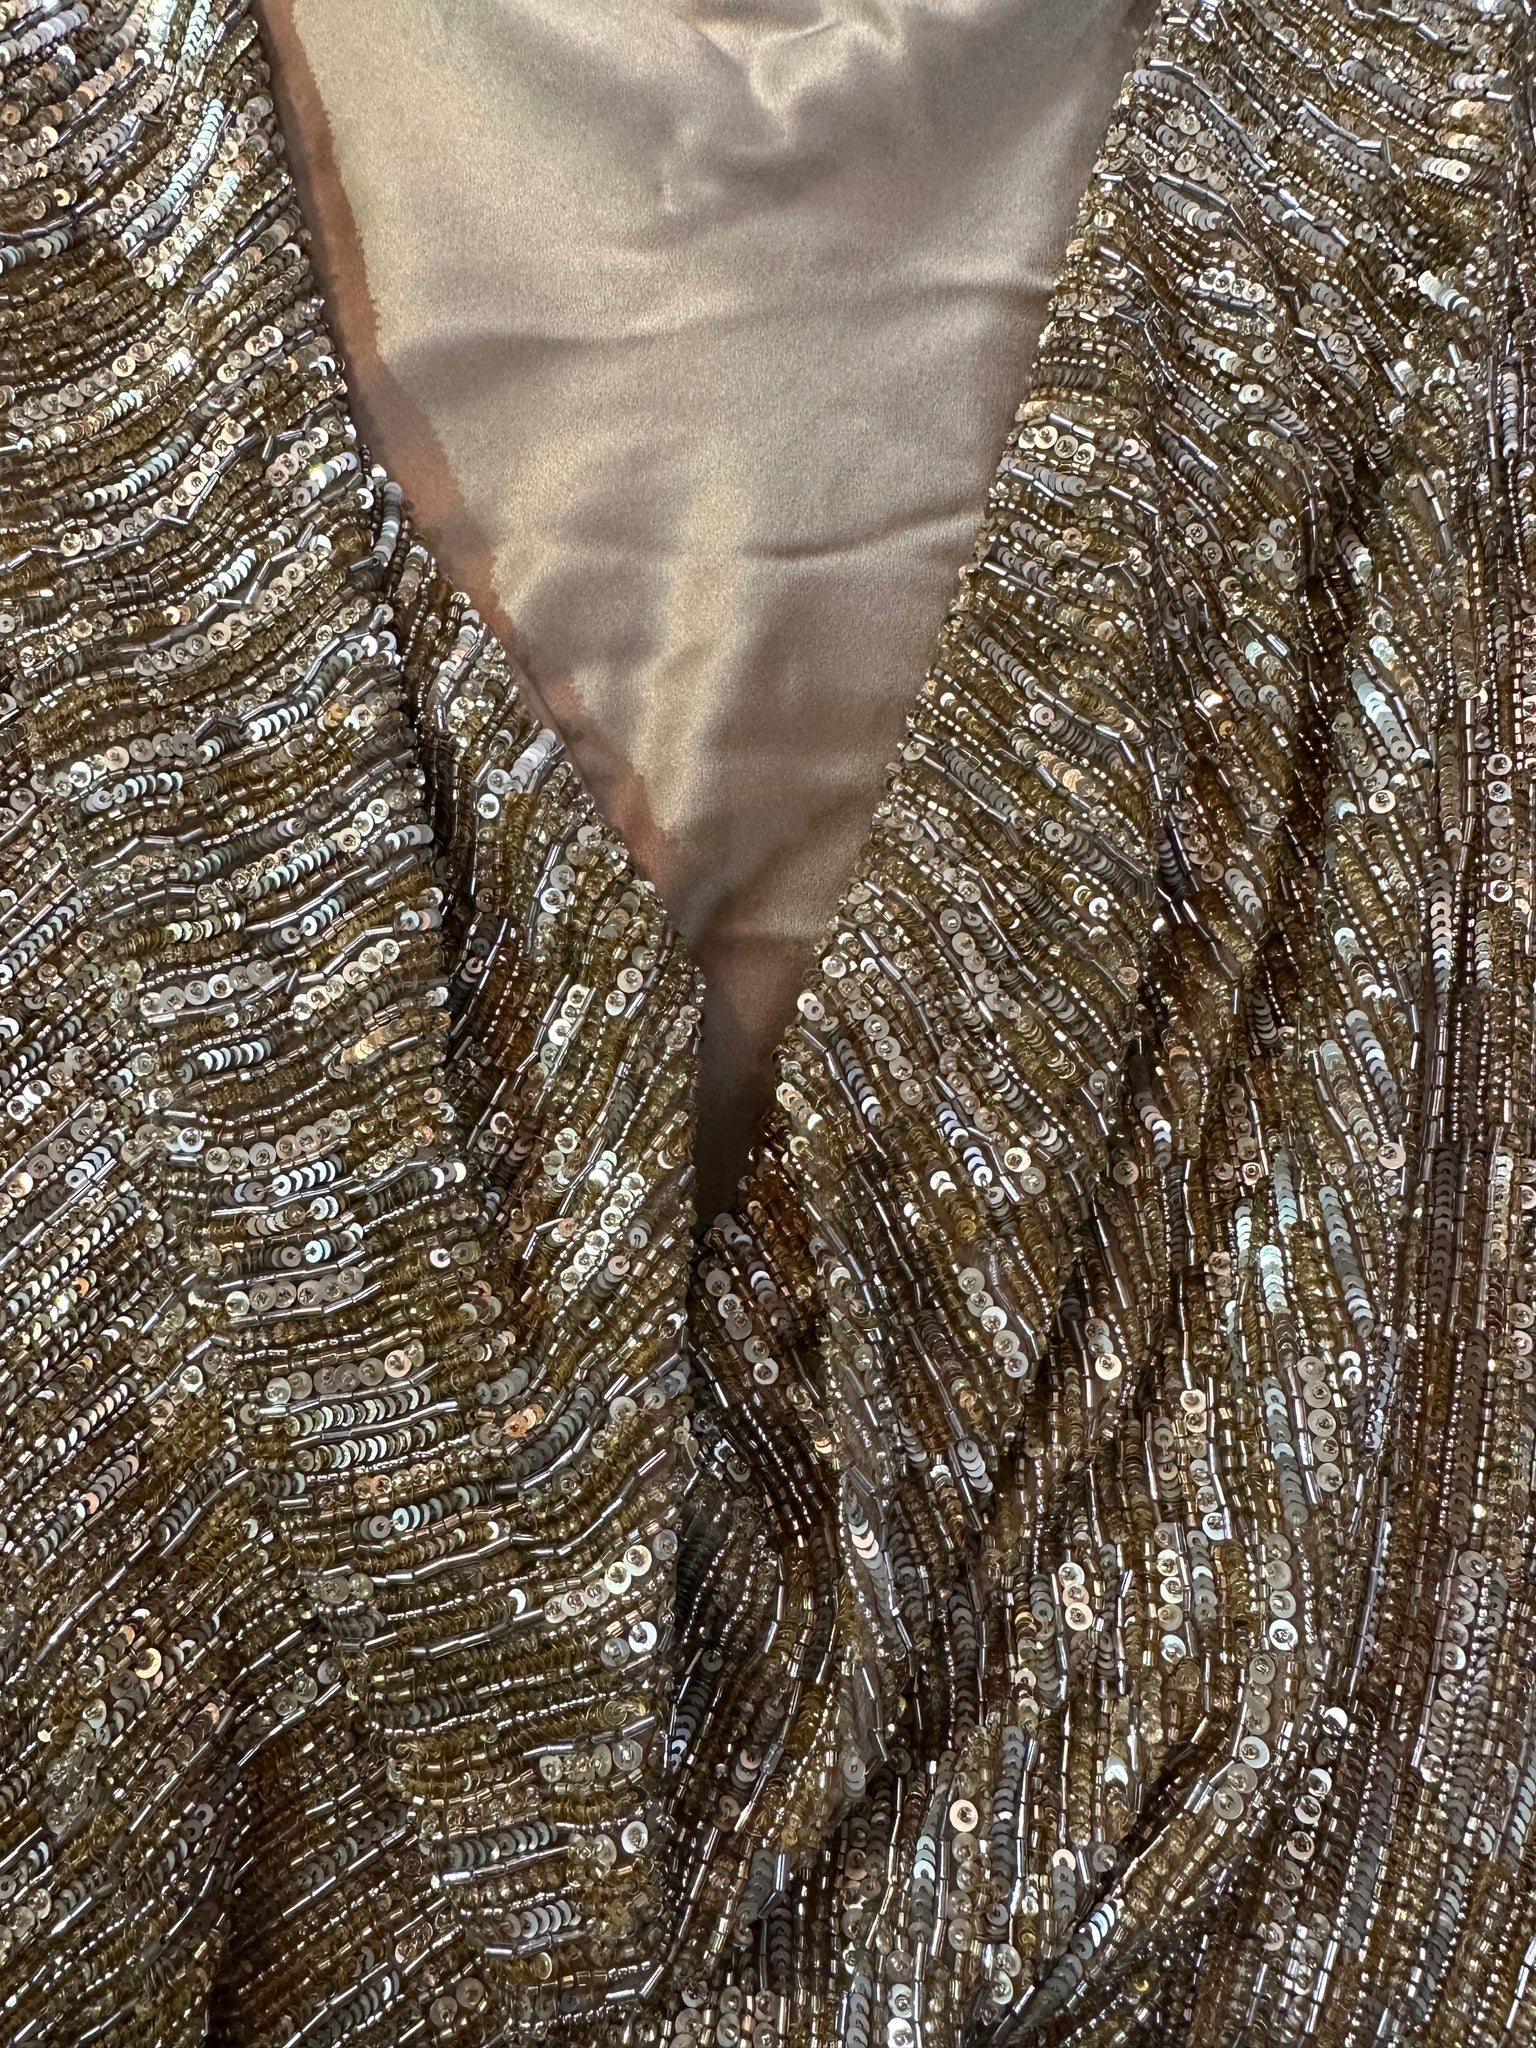 Monica Lhuillier 2000s Gold Sequin Beaded Cocktail Dress DETAIL 3 of 5